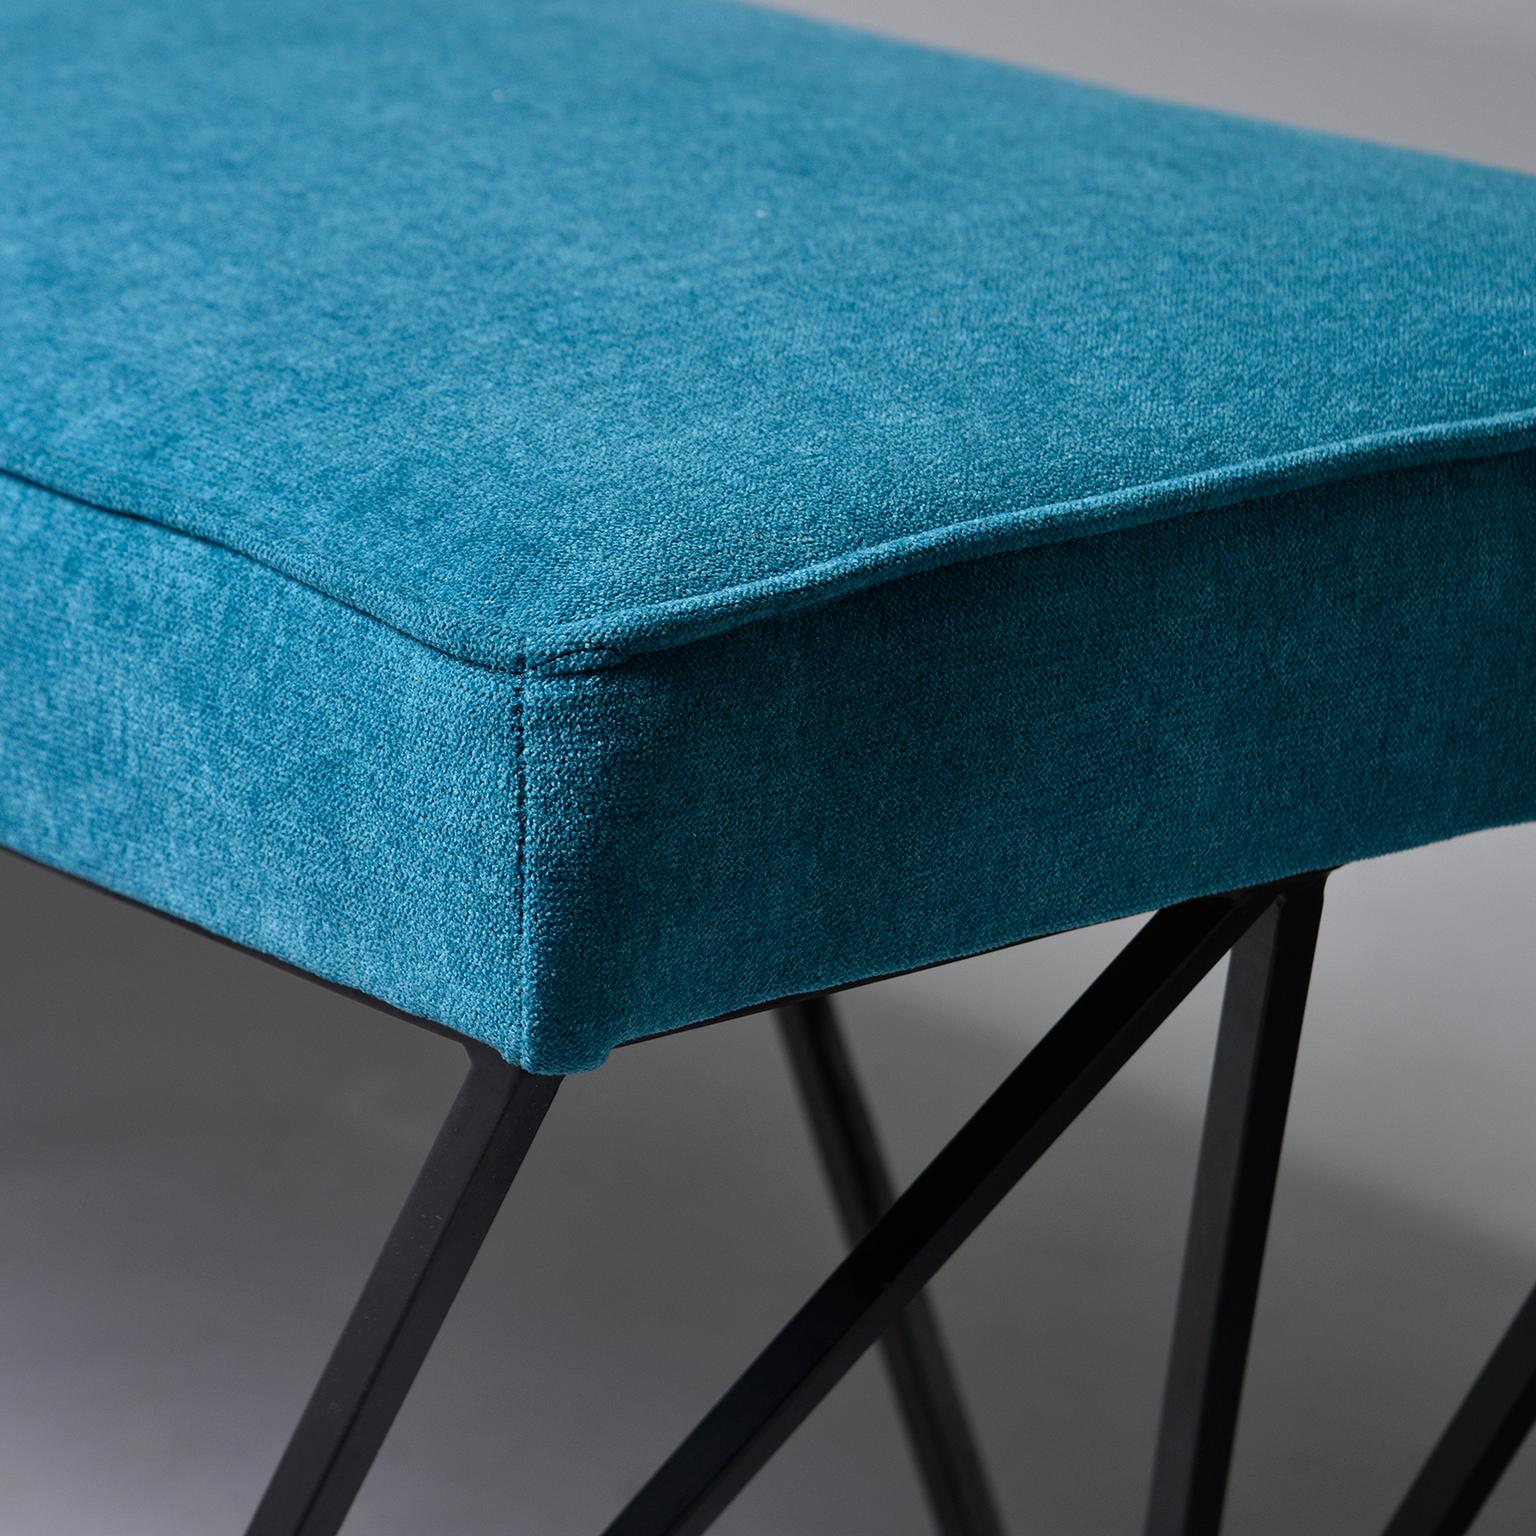 Italian Midcentury Style Bench with Teal Fabric and Black Metal Legs 2